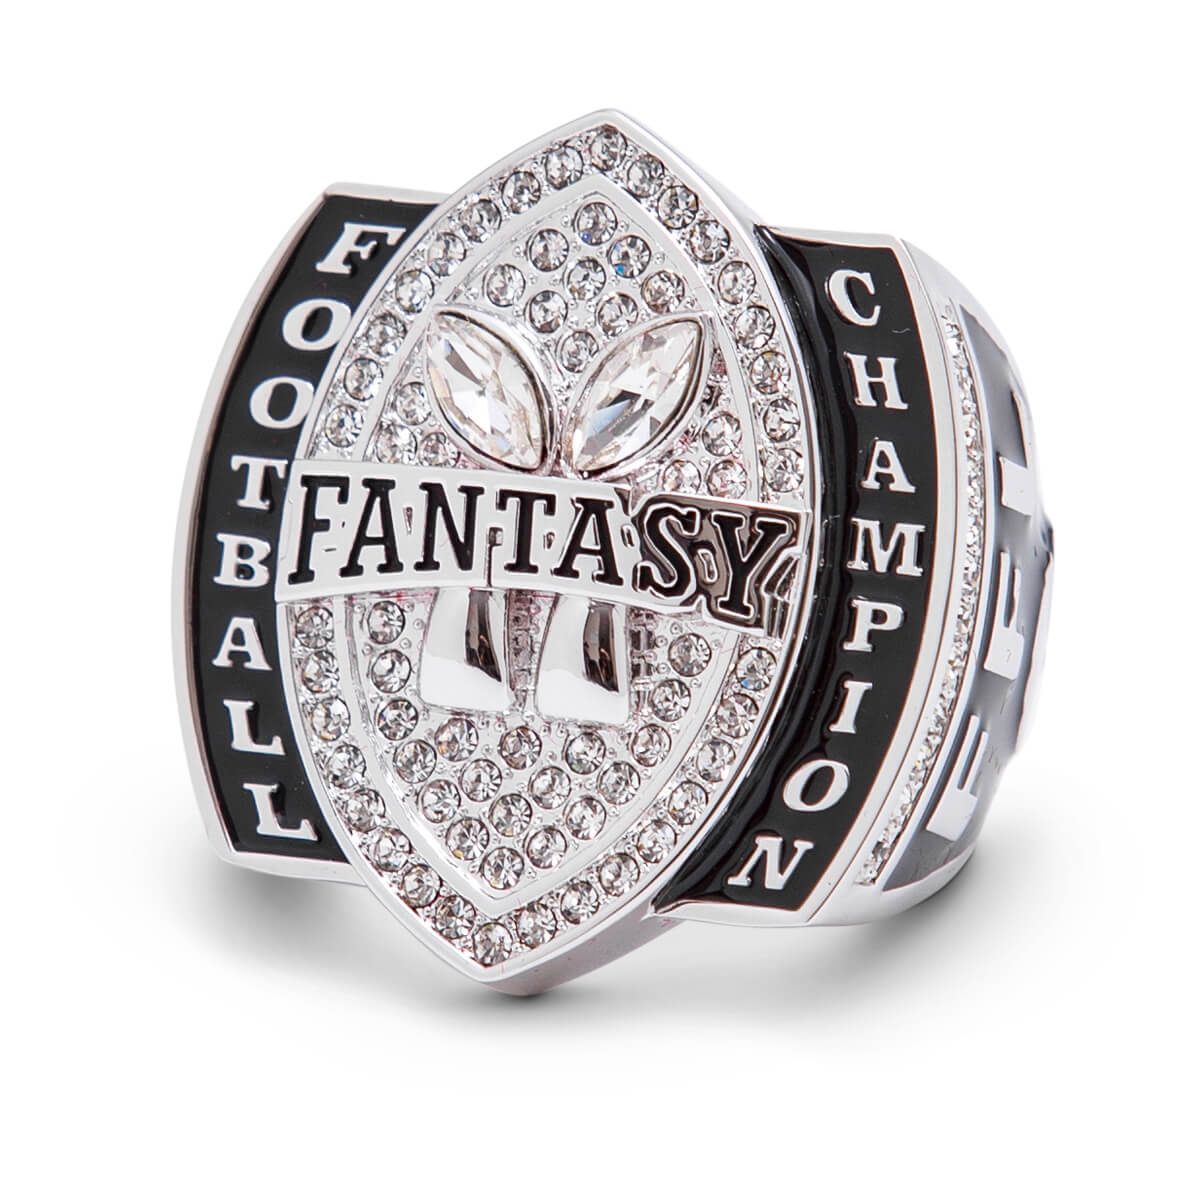 The Double Down' Fantasy Football Championship Ring